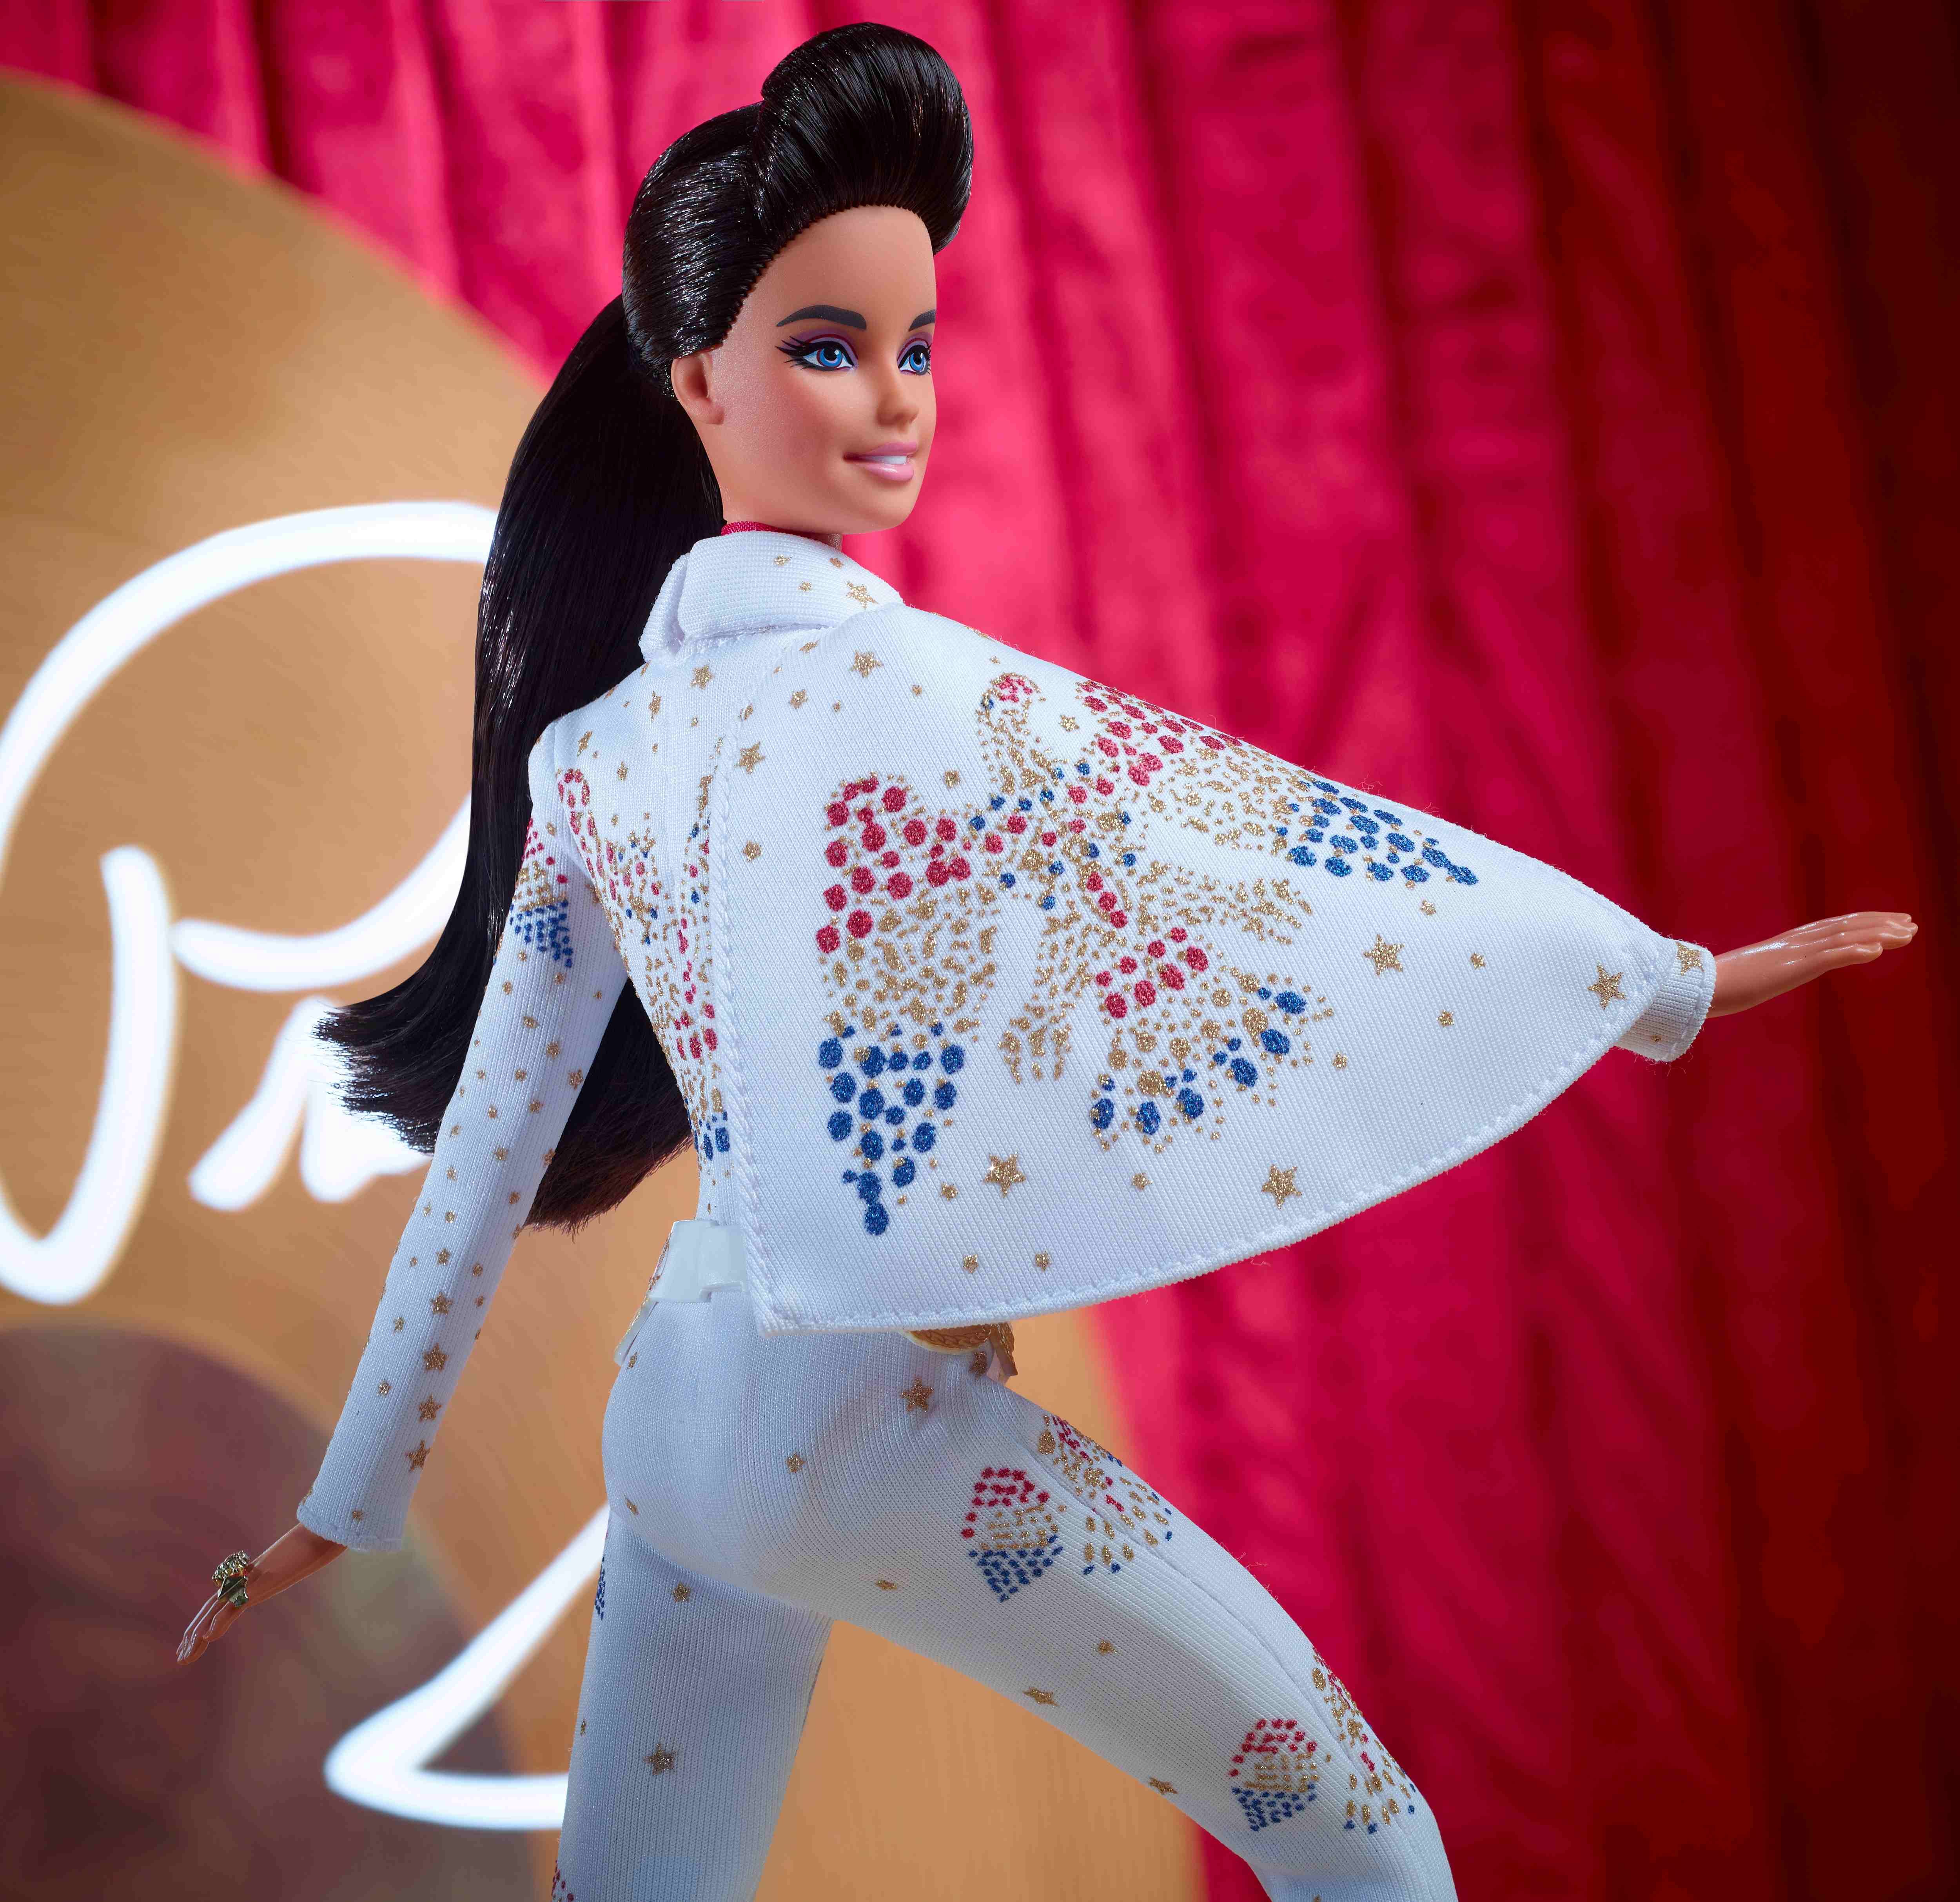 Barbie celebrates Elvis Presley with collectible doll